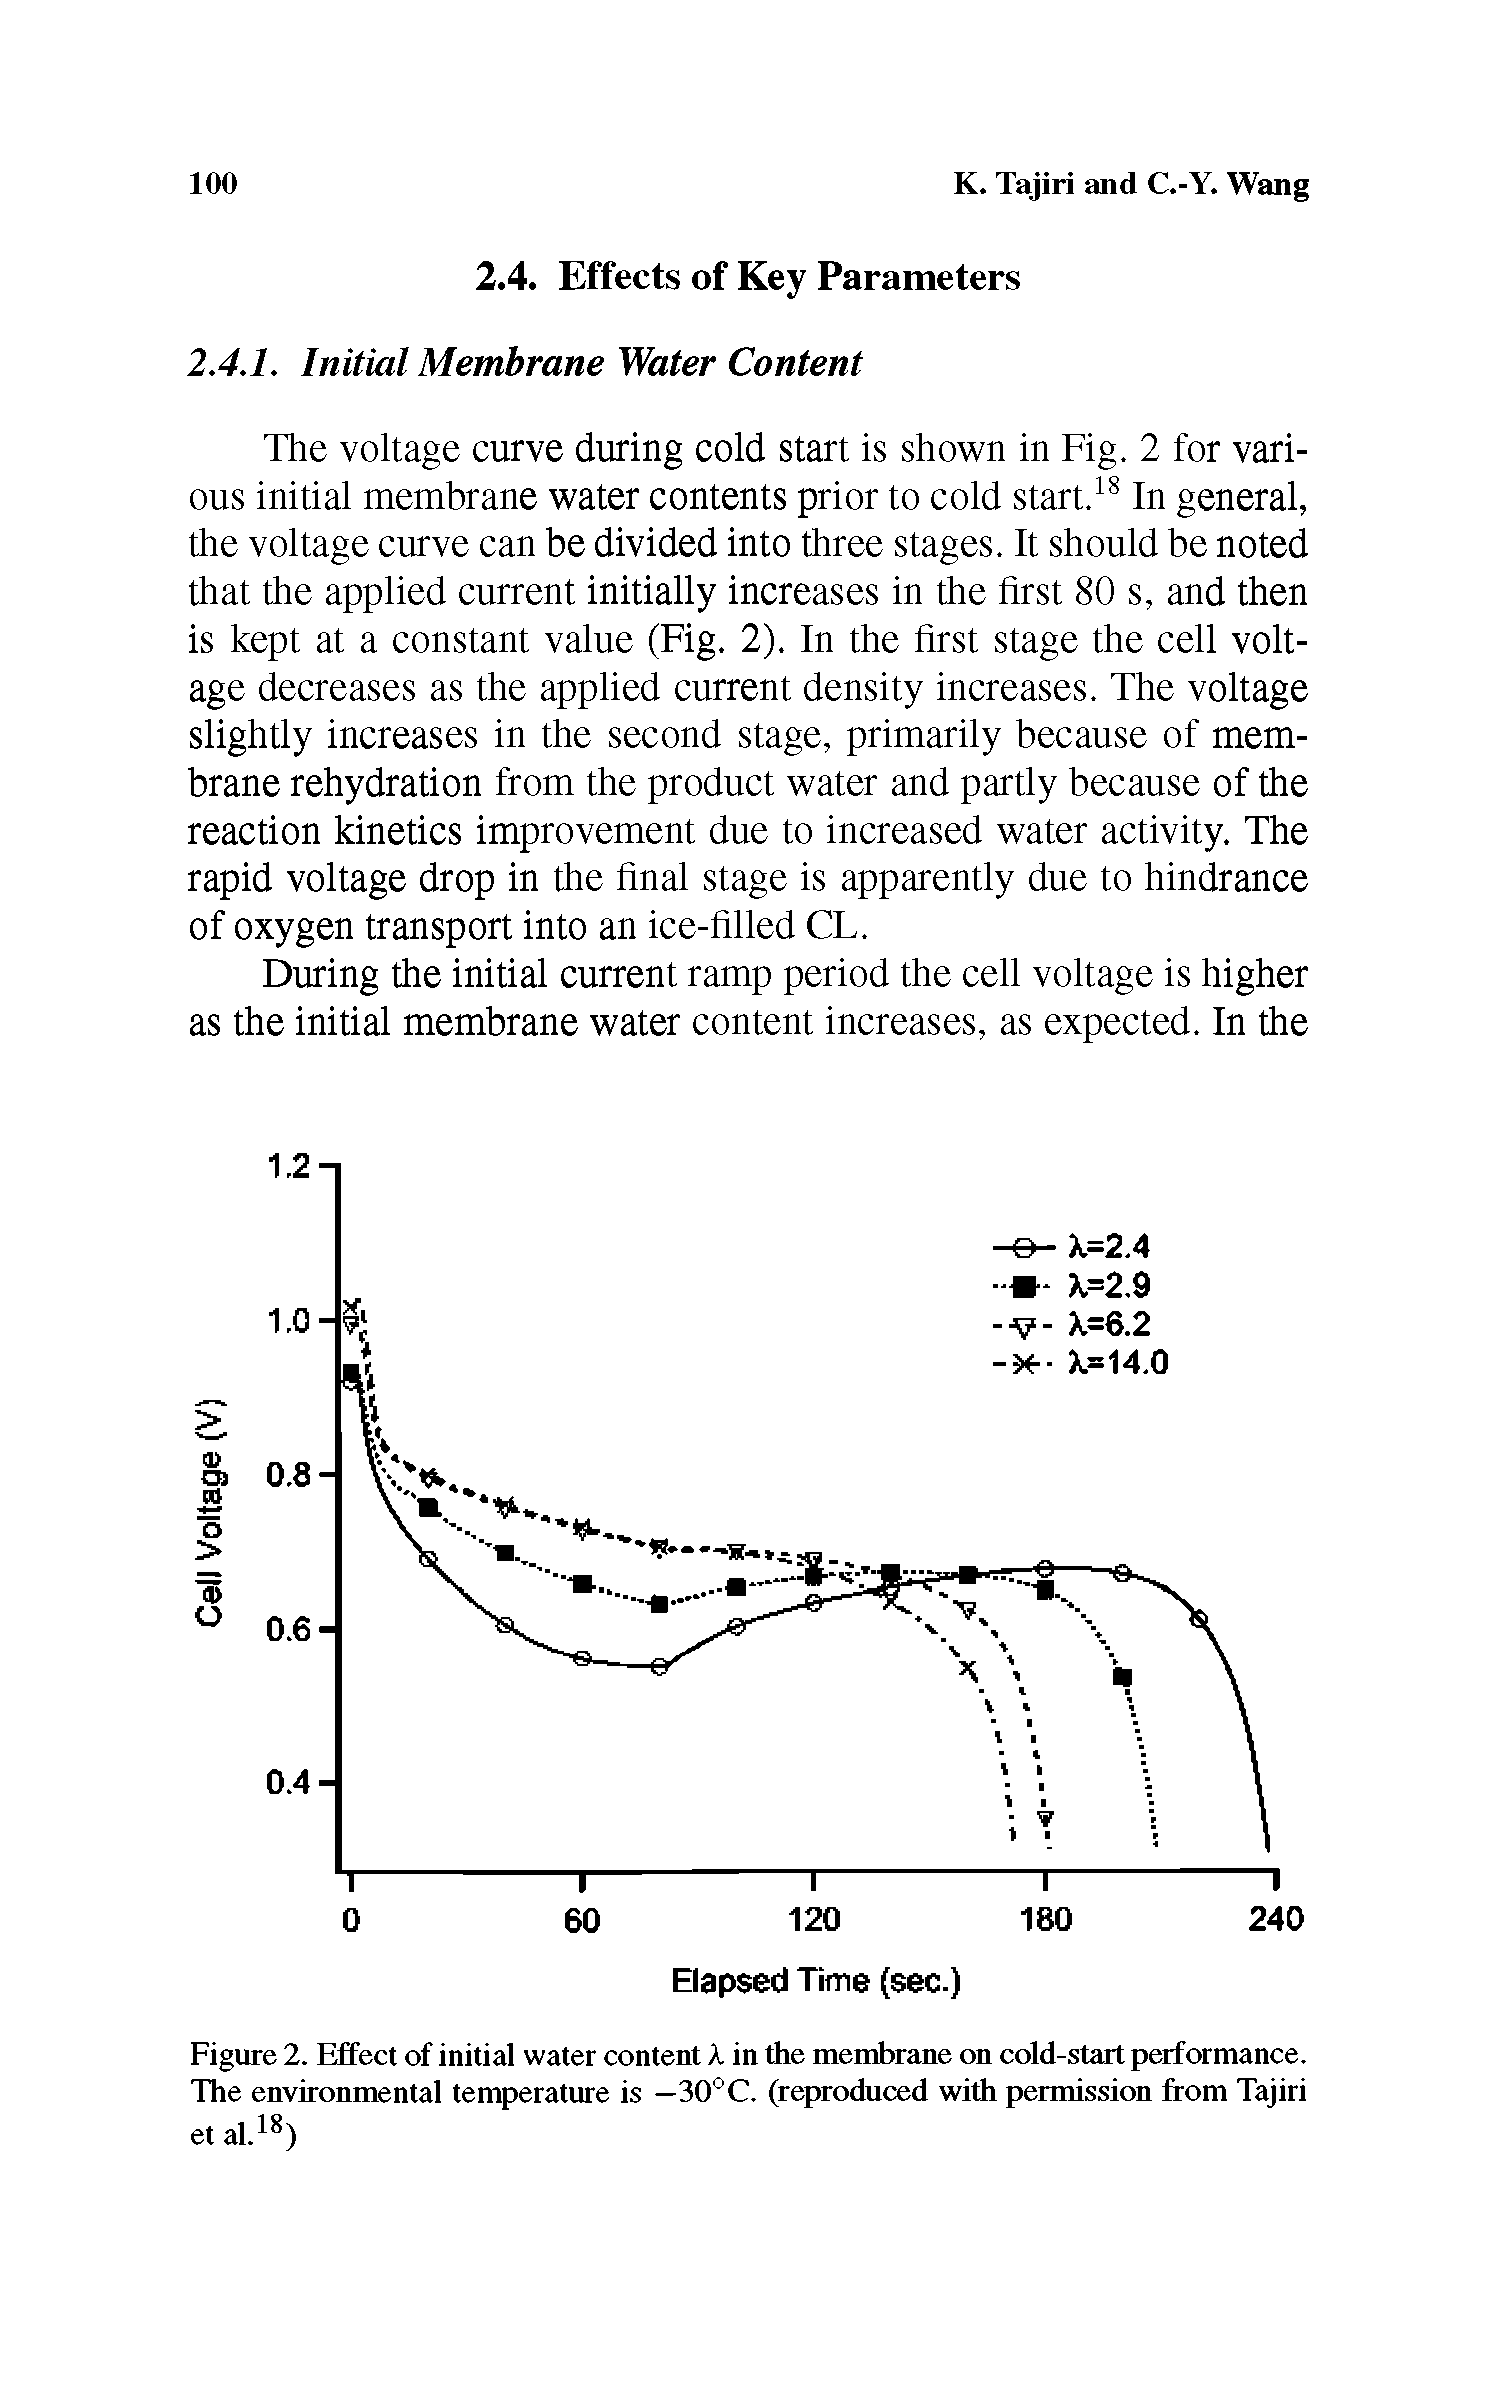 Figure 2. Effect of initial water content X in the membrane on cold-start performance. The environmental temperature is —30°C. (reproduced with permission from Tajiri et al.18 )...